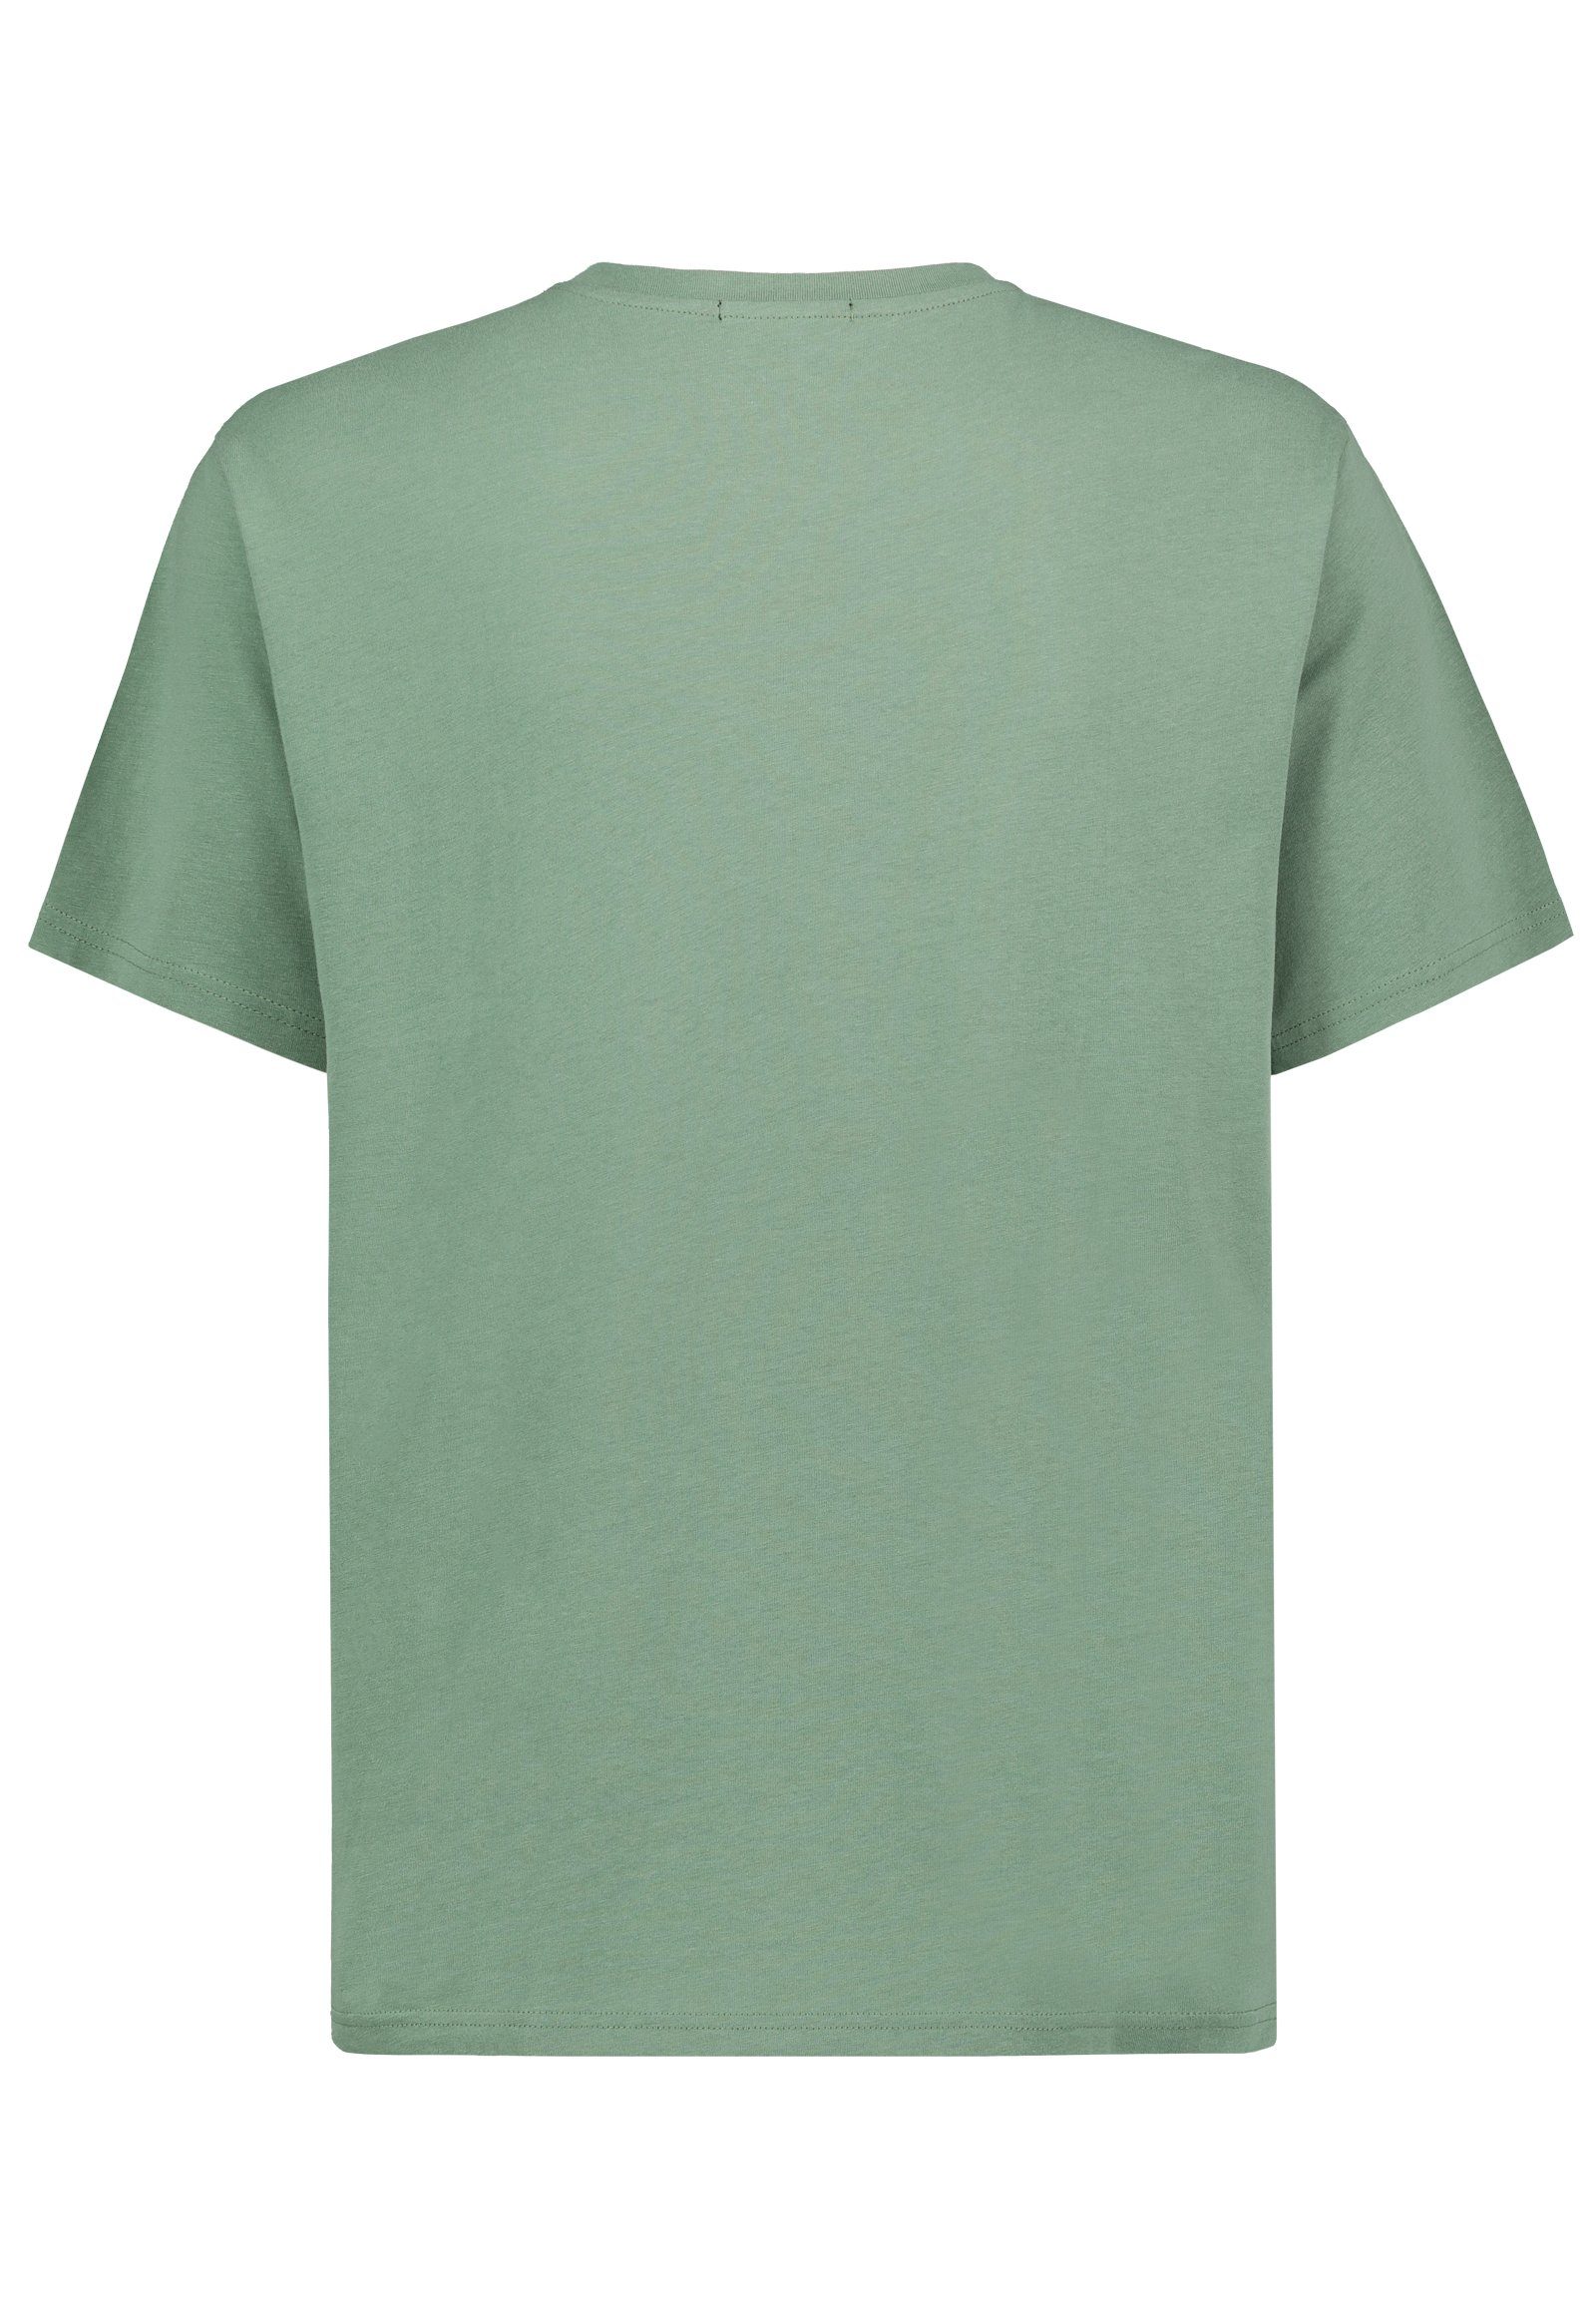 green T-Shirt T-Shirt Sommer Print mit SUBLEVEL